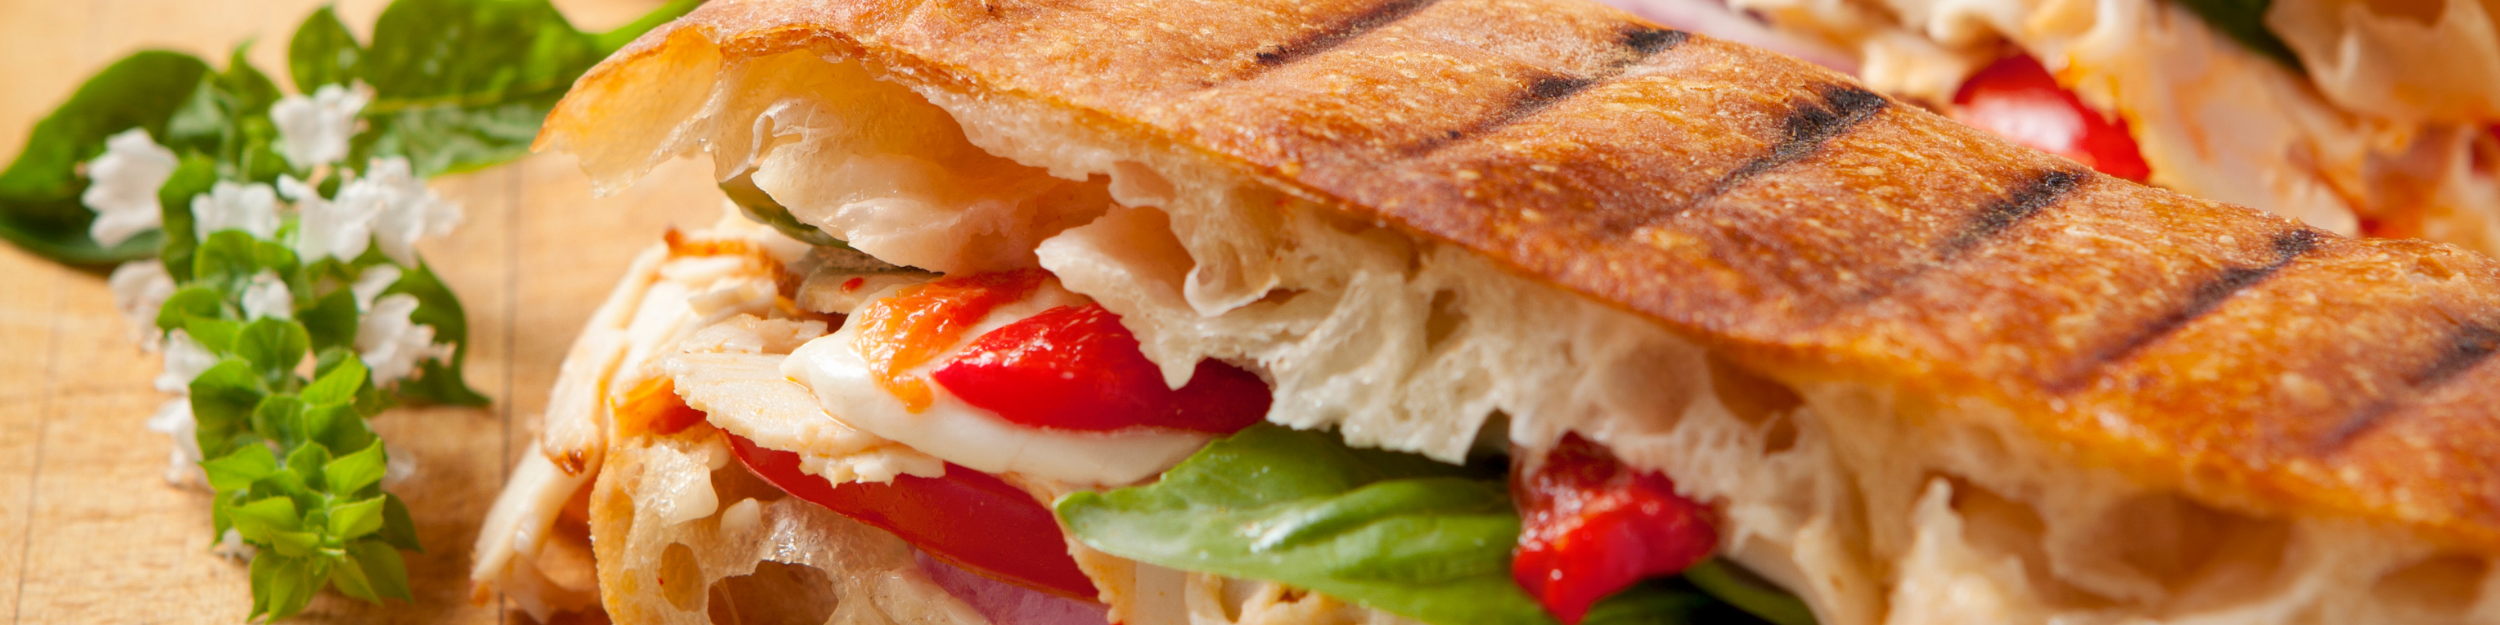 Panini grilled sandwich with cheese, meat and vegetables